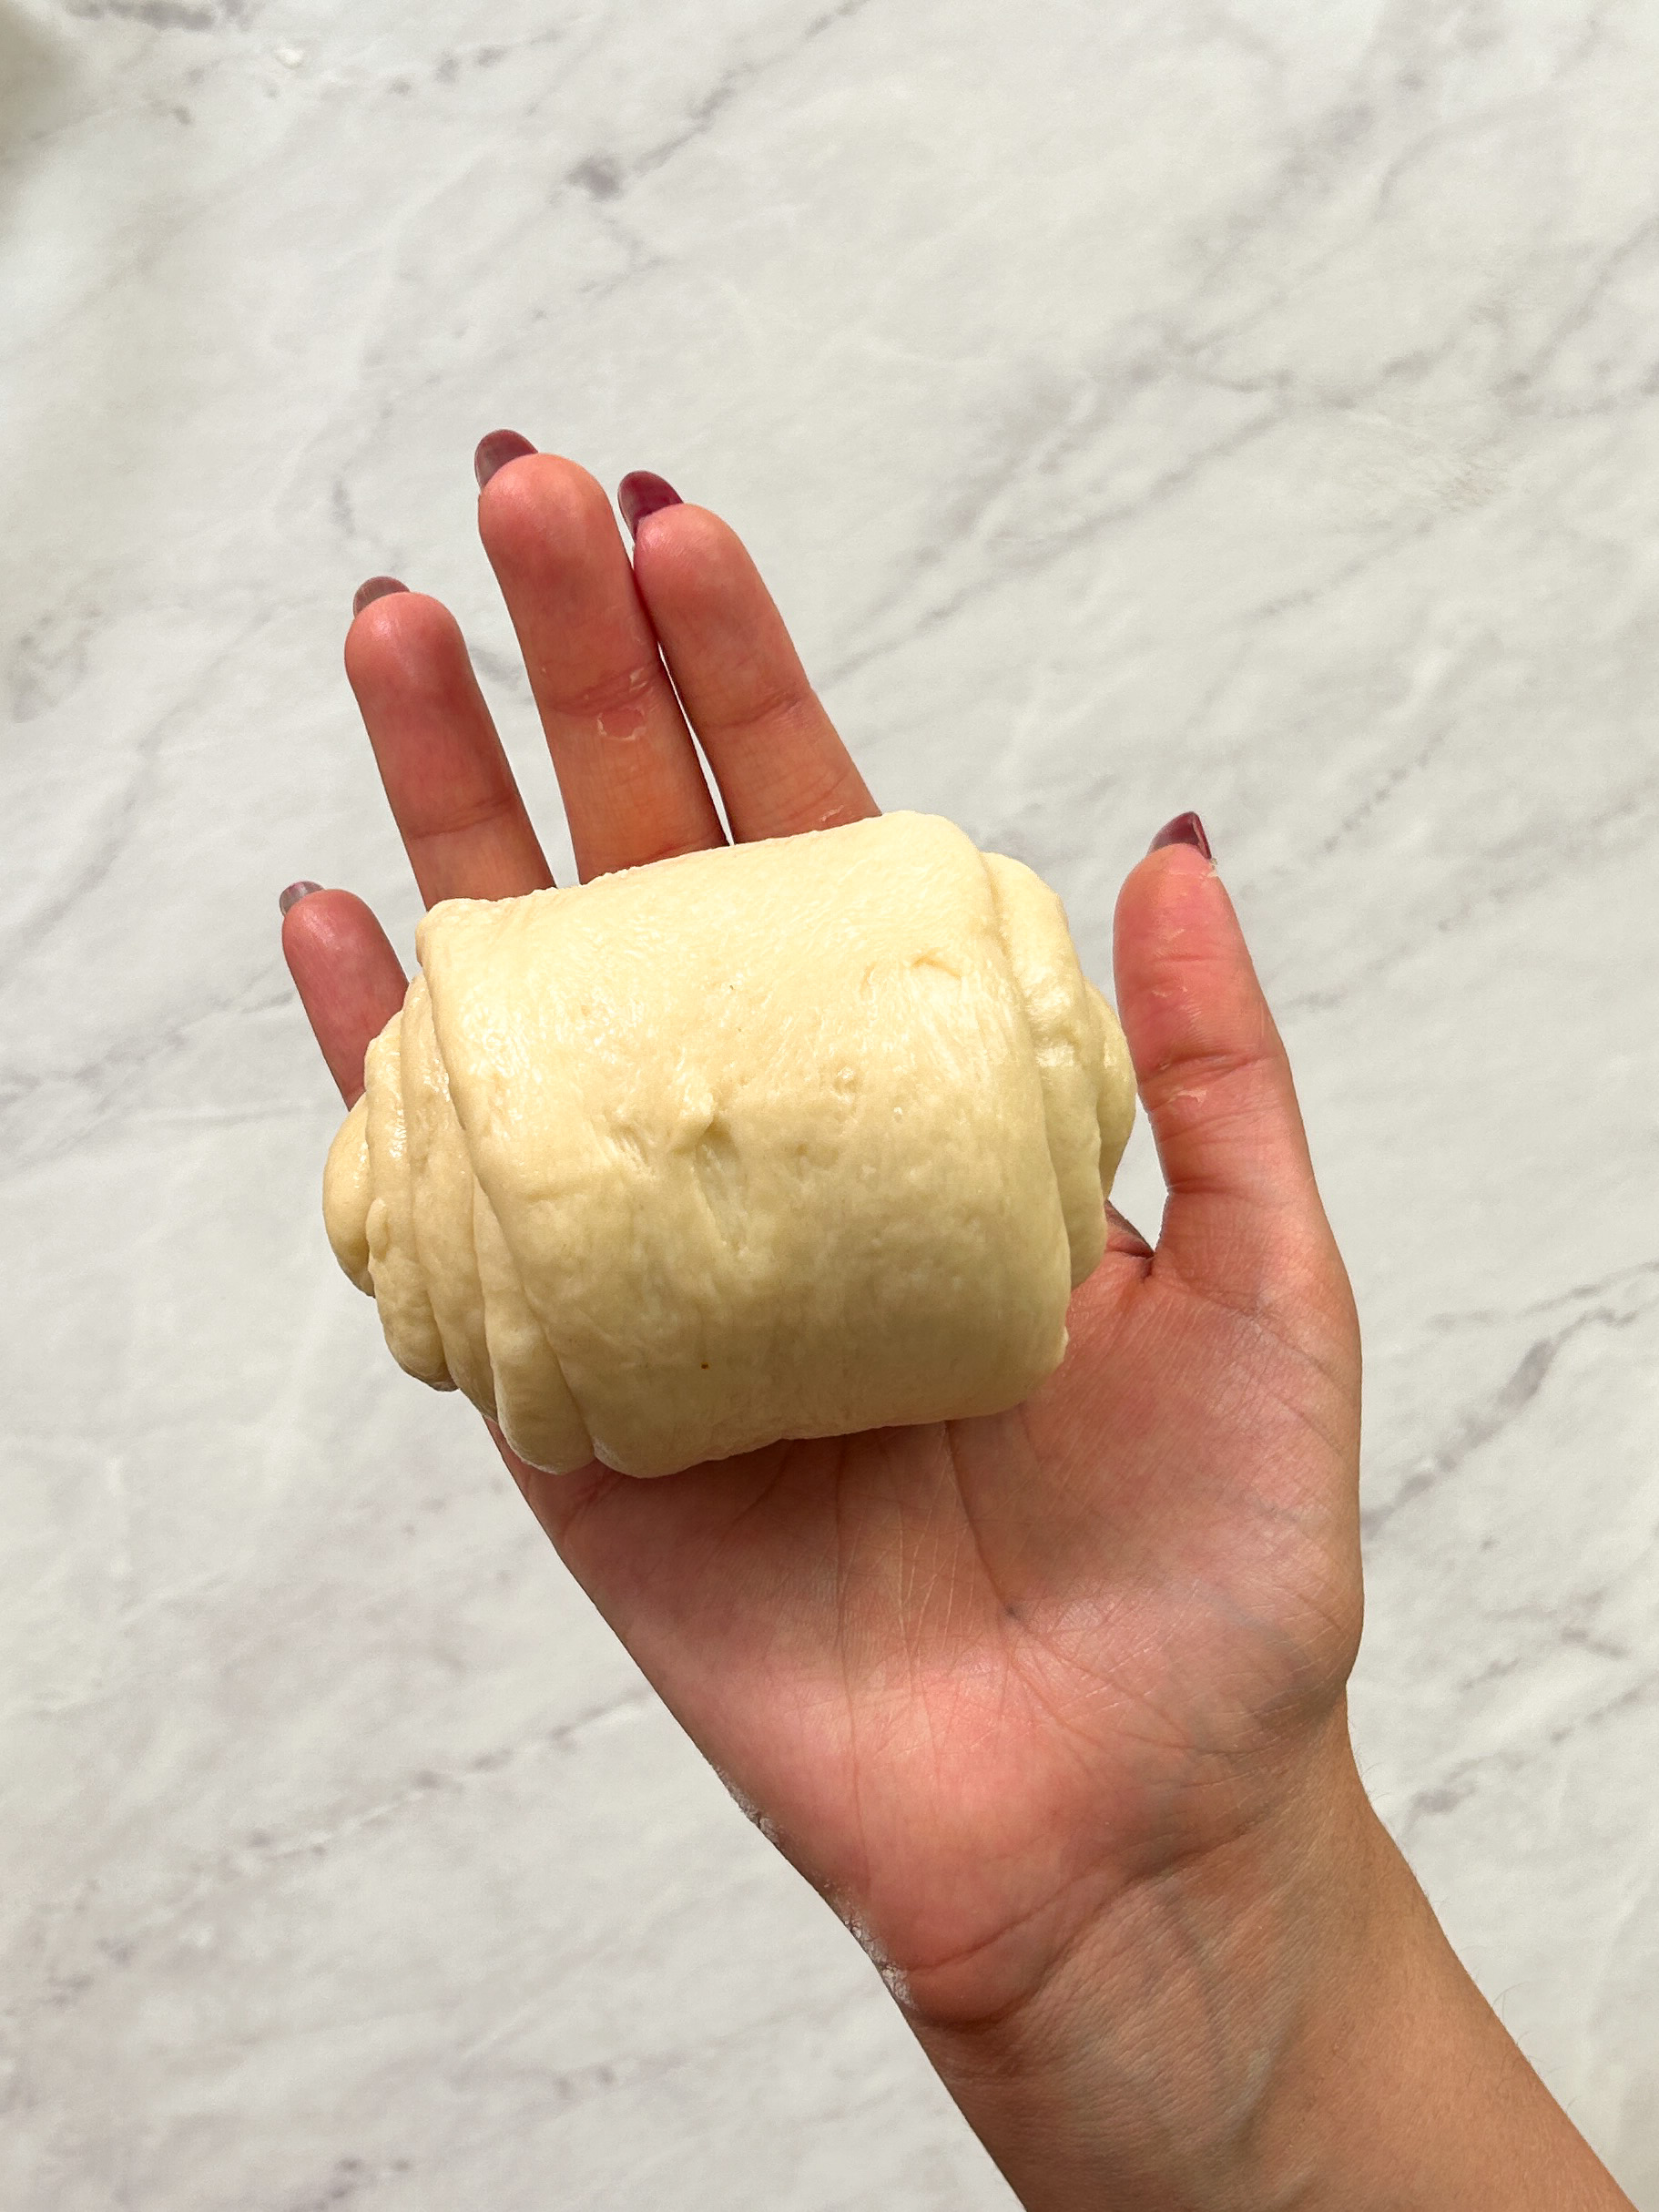 a cylindrical roll of dough in a hand